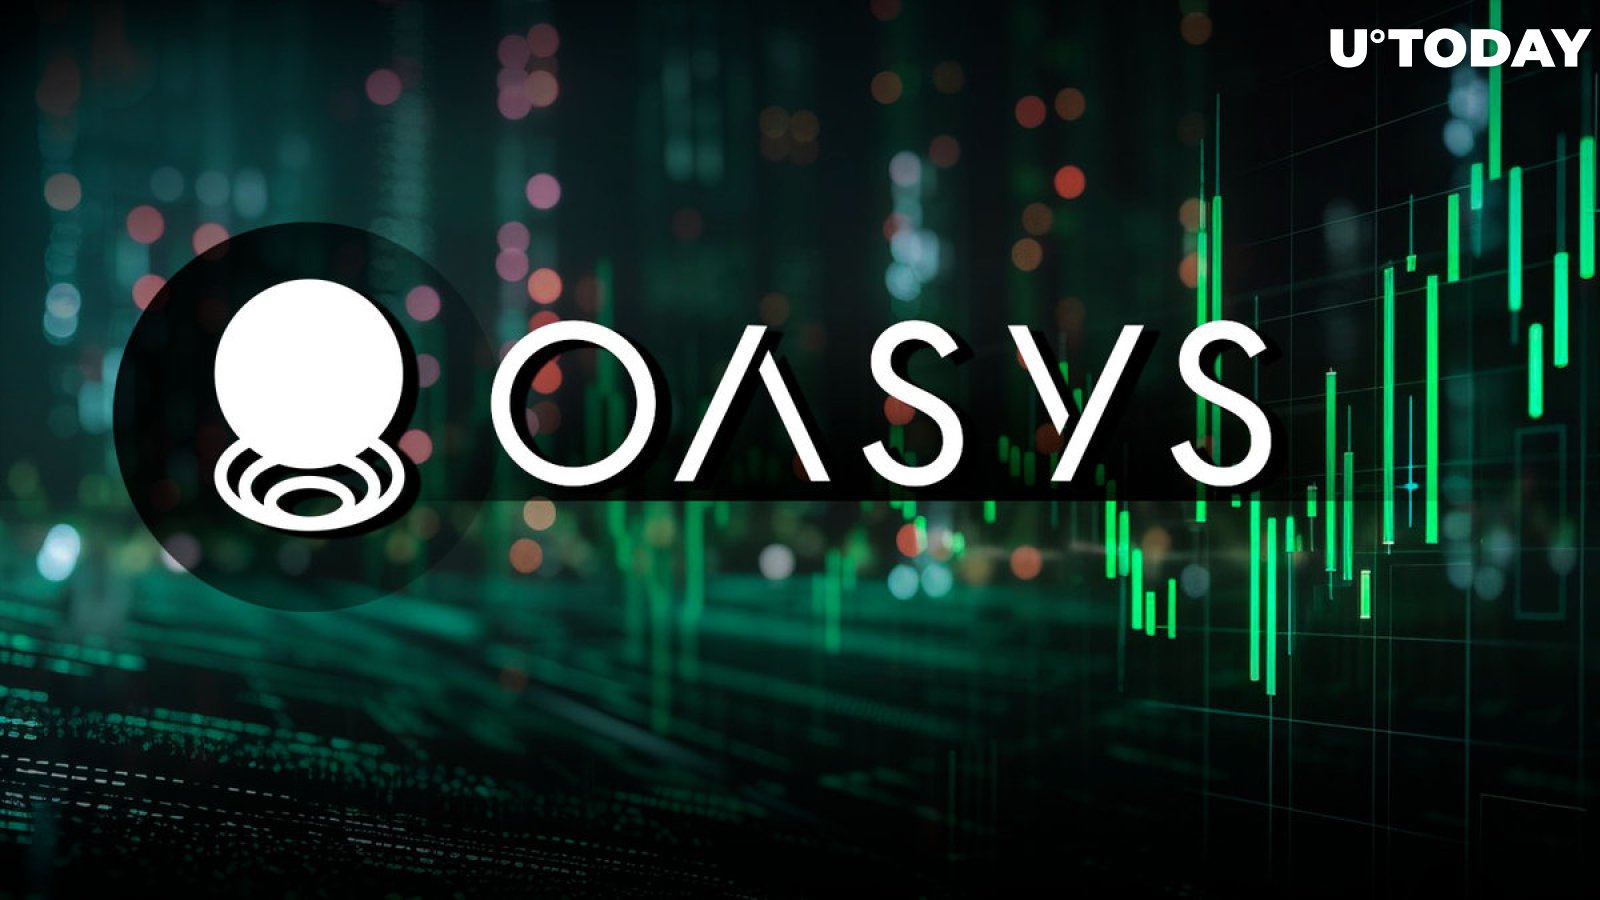 Oasys (OAS) Faces 63% Price Surge as Ubisoft's Game to Be Released on Blockchain